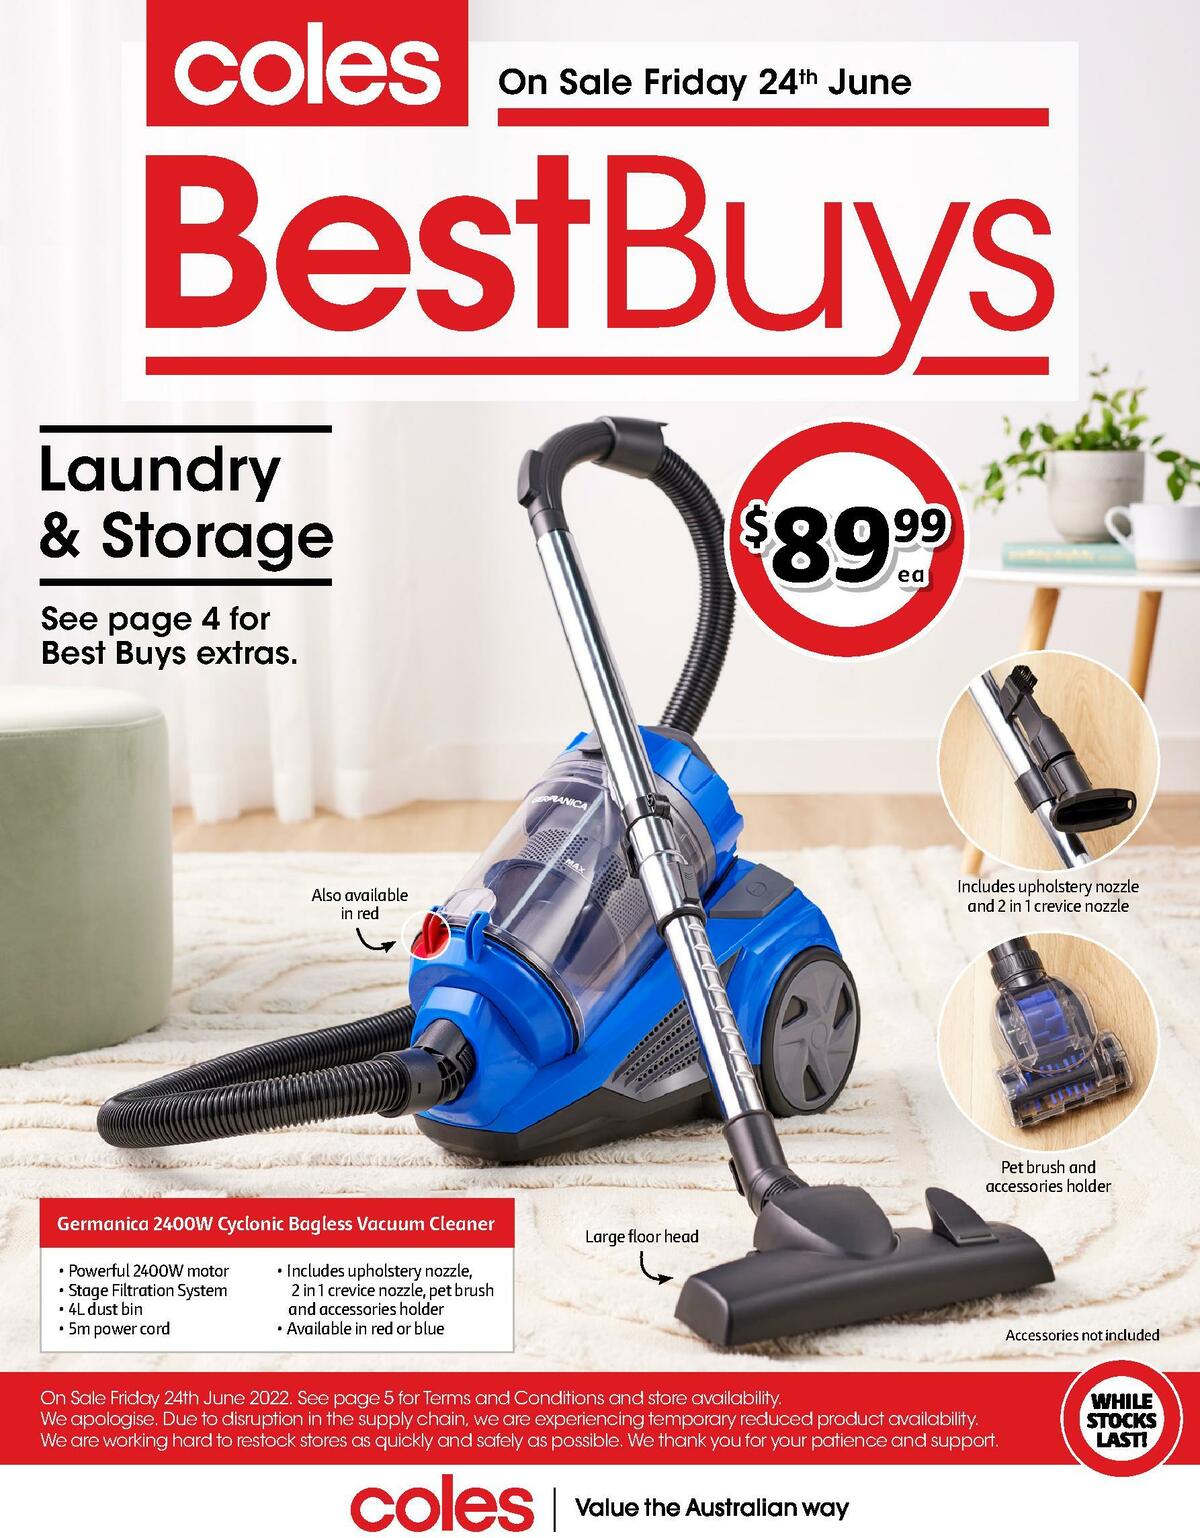 Coles Best Buys - Laundry & Storage Catalogues from 24 June